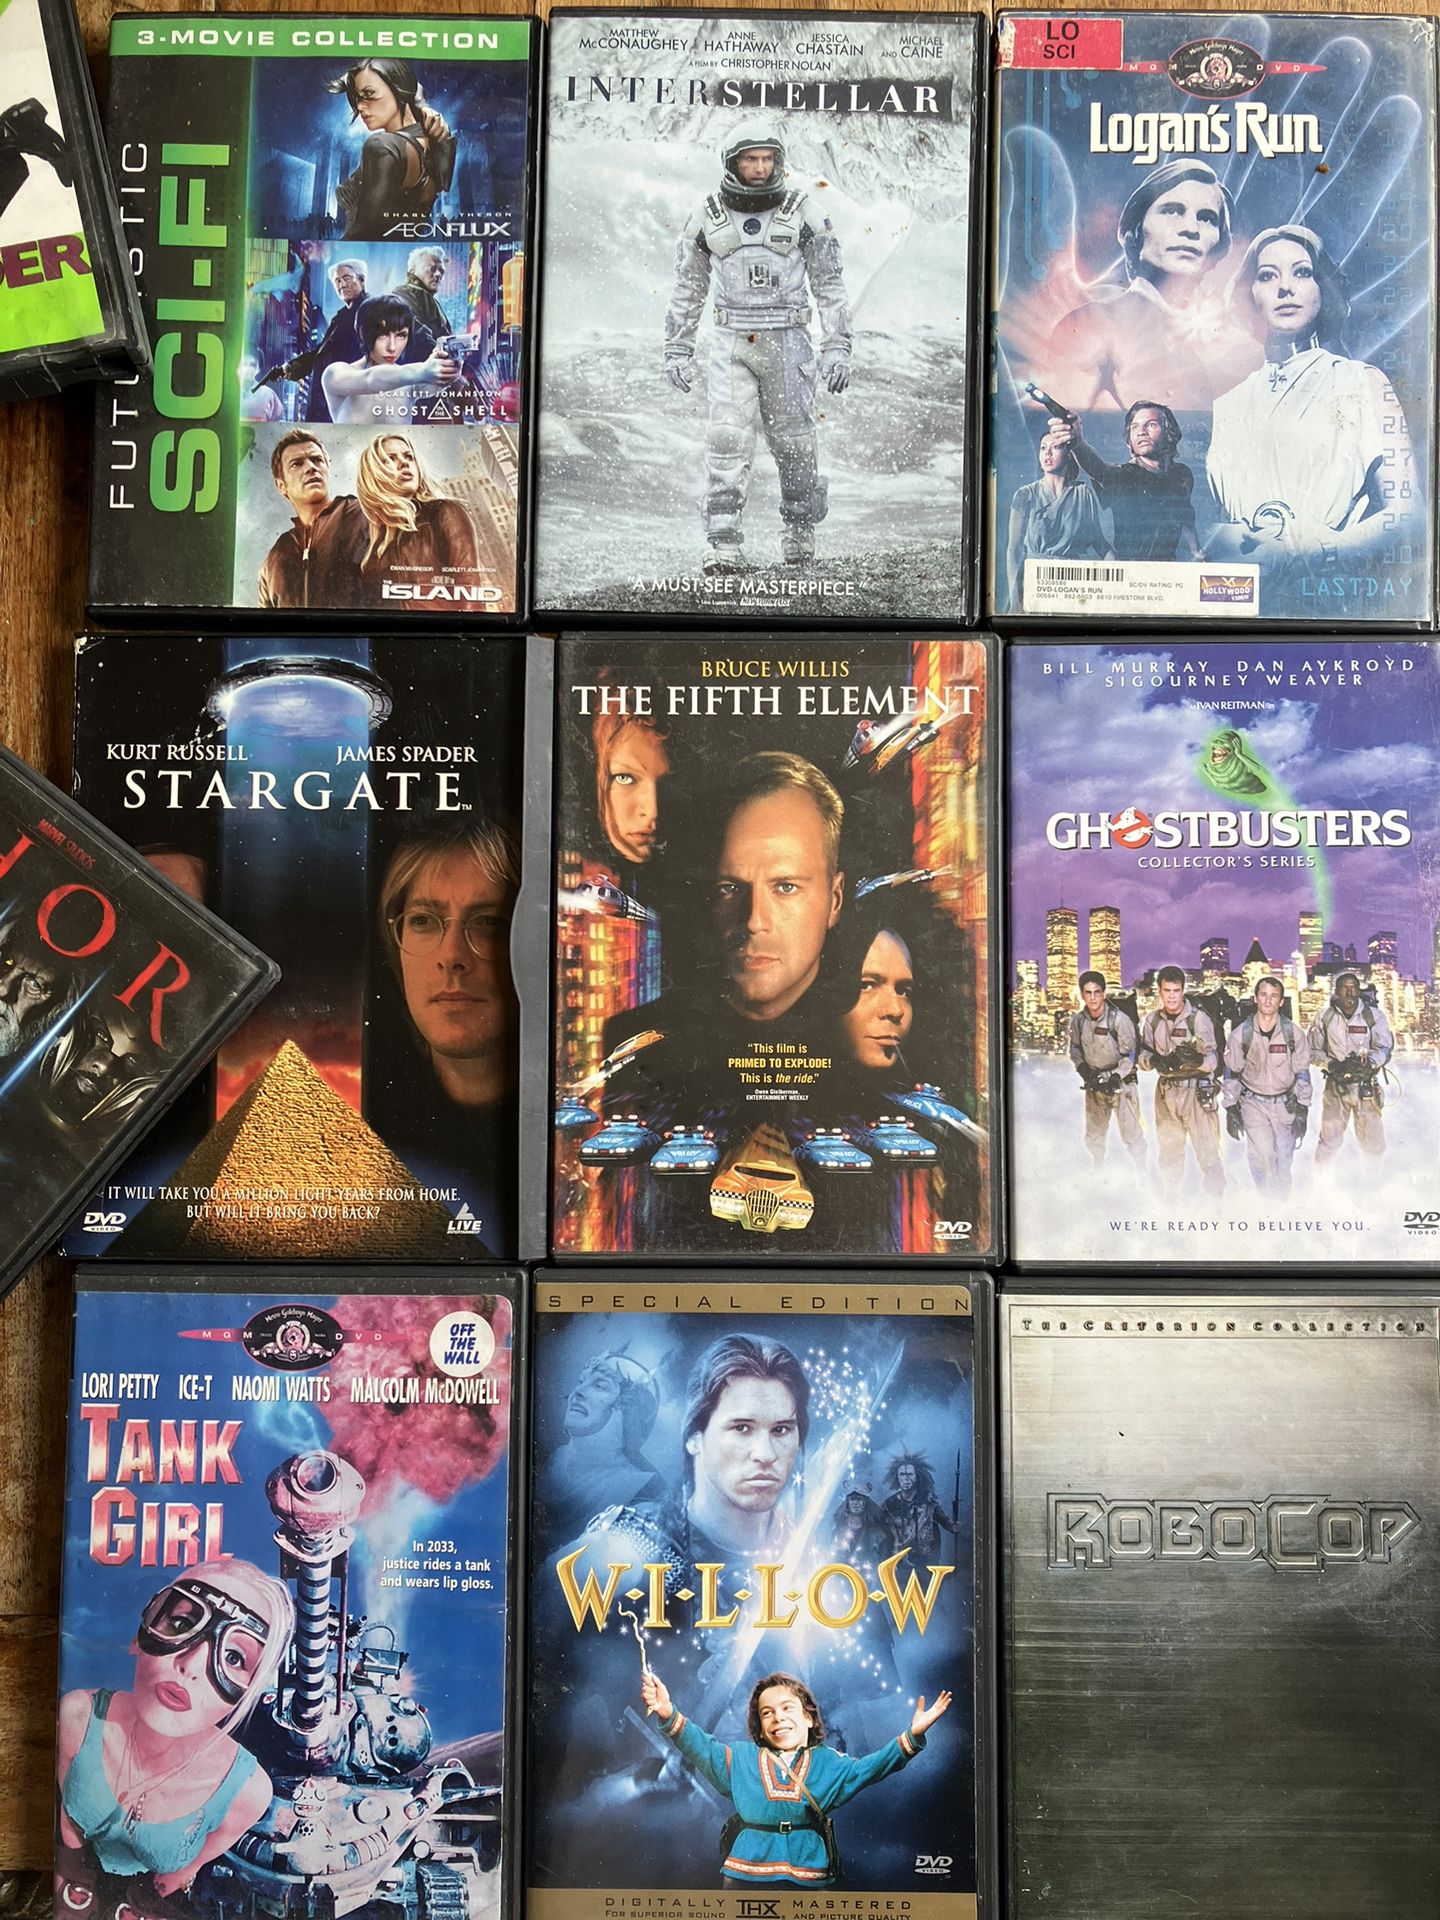 1 Dollar Or Best Offer For 1 DVD / Classic Sci-fi / Comedy And More 